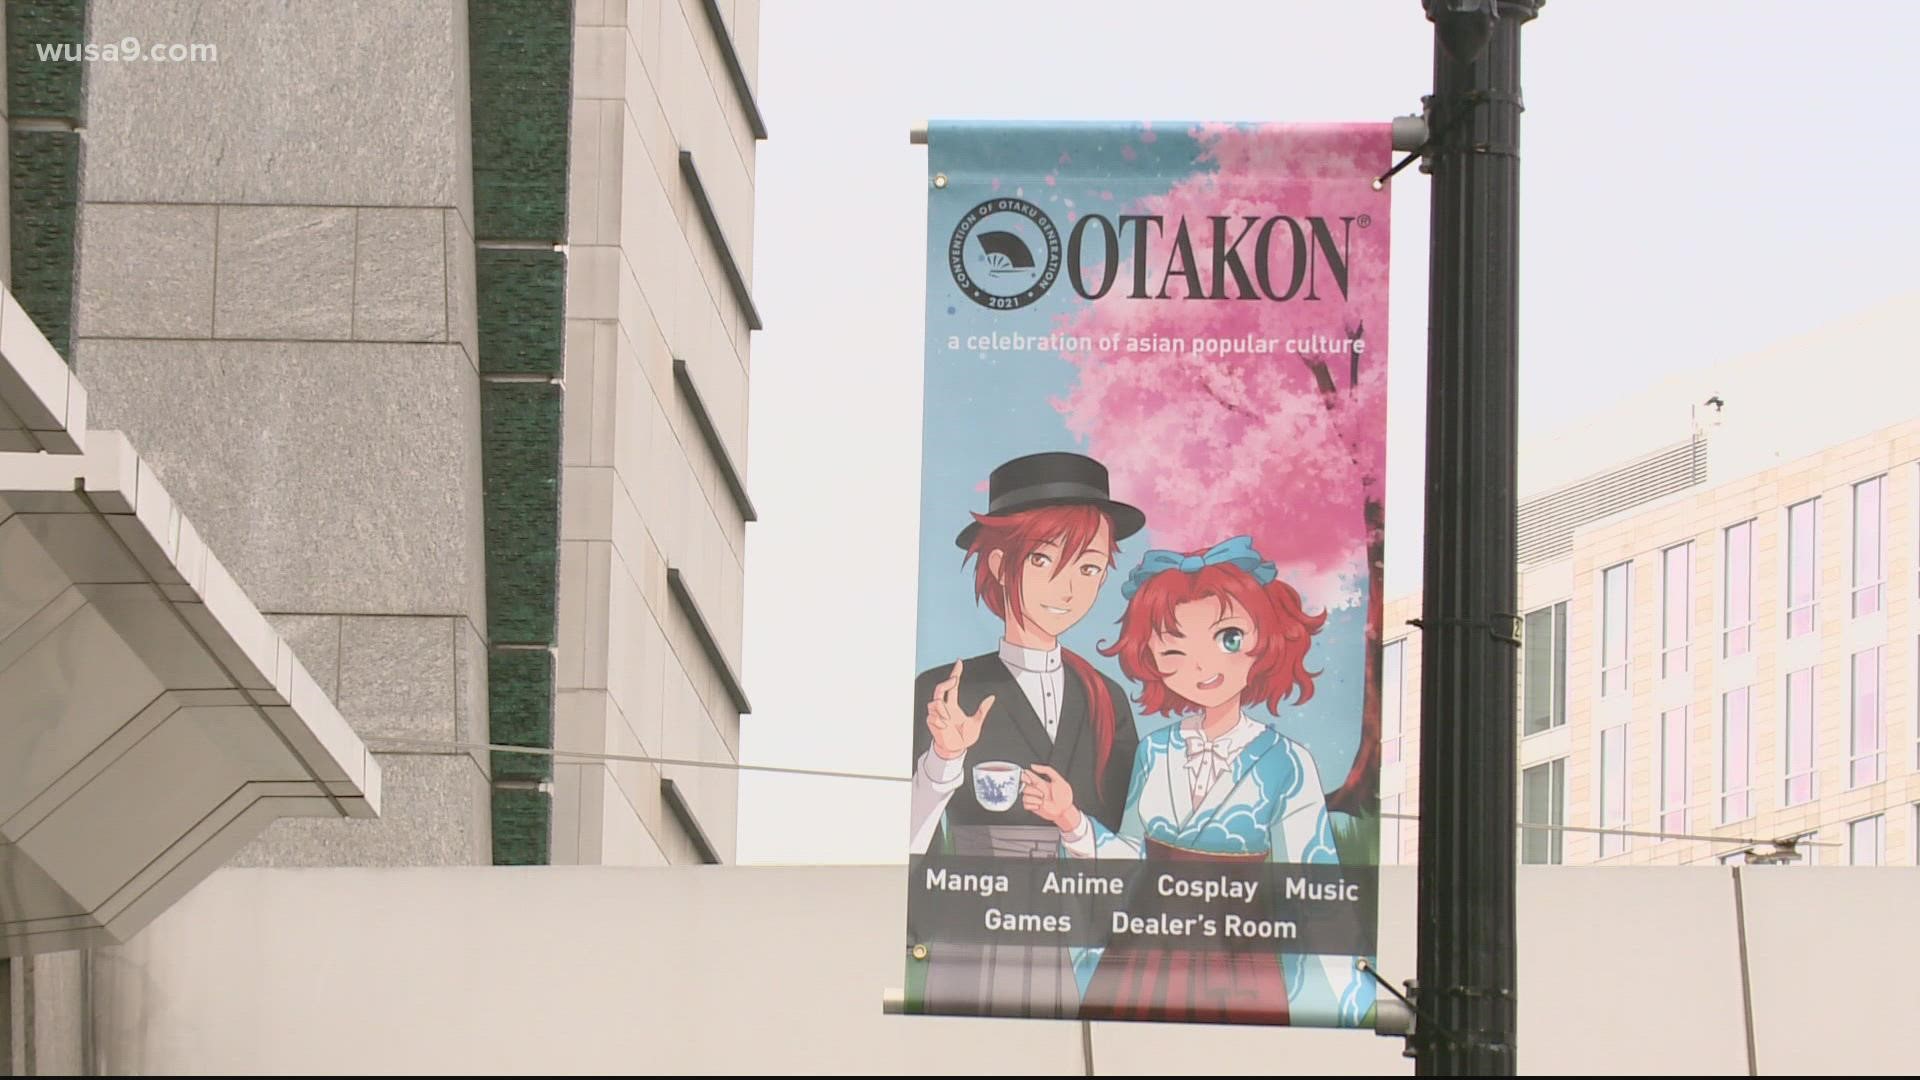 Massive anime convention Otakon comes to DC this summer  WTOP News  Anime  Anime conventions Japanese pop culture